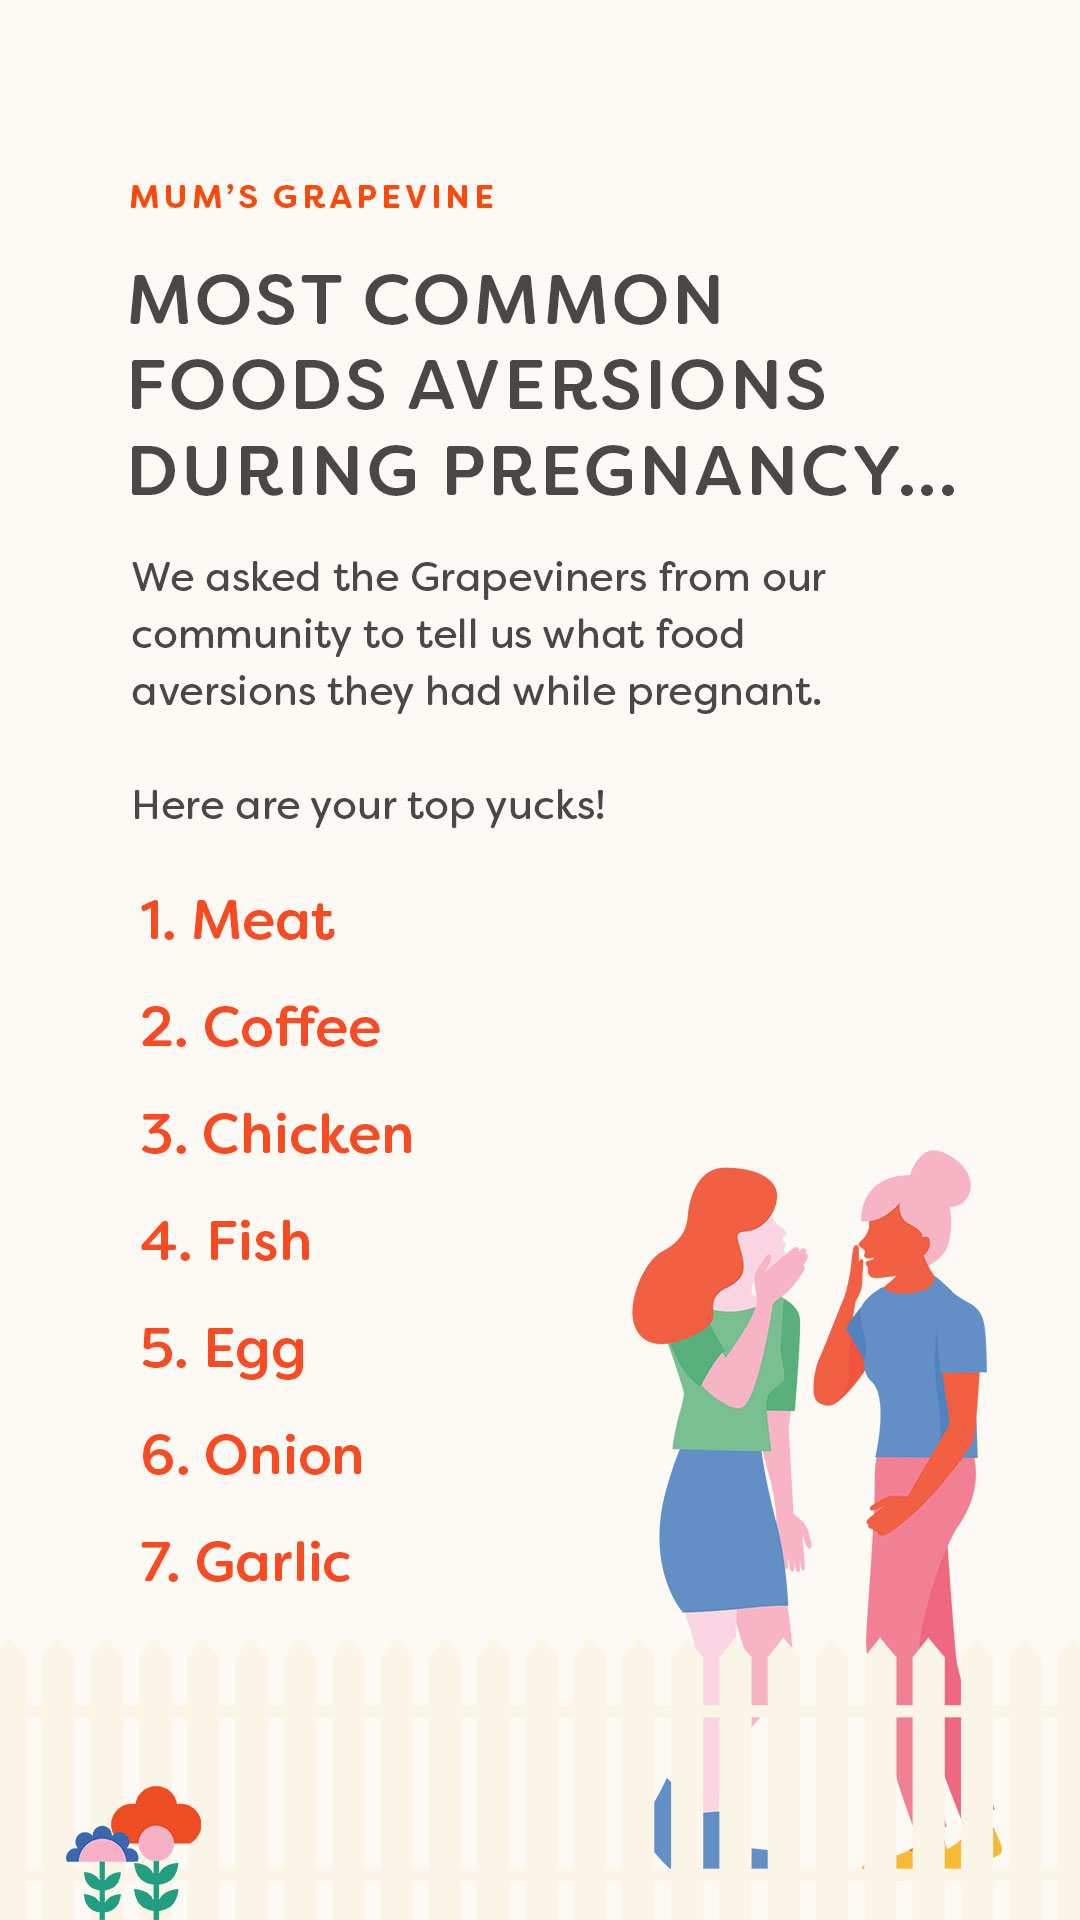 List of foods pregnant women have an aversion to